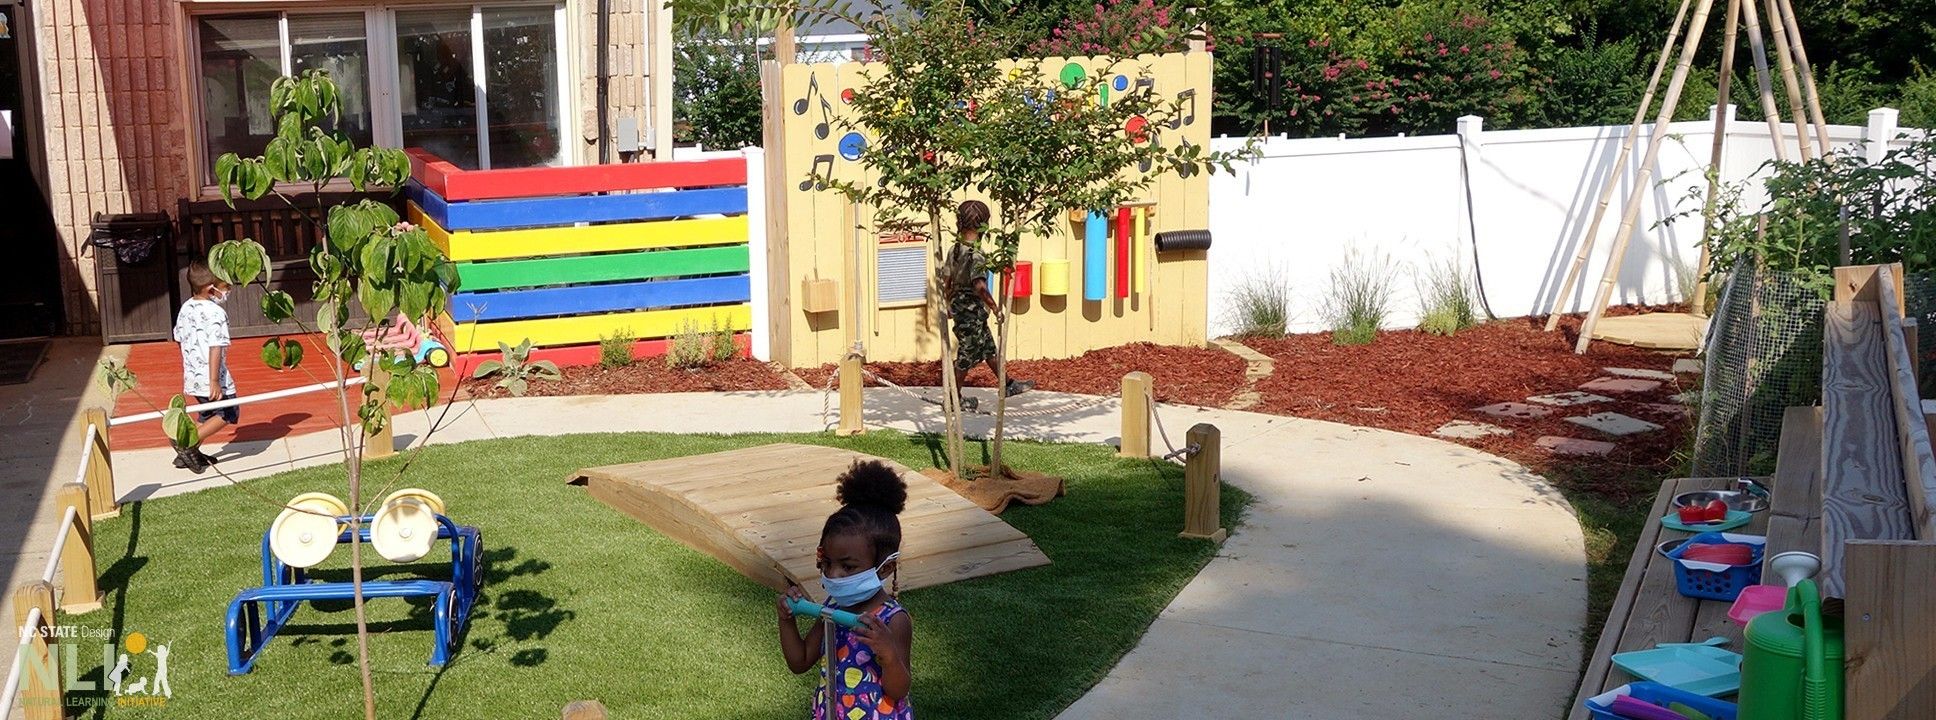 Healthy Starts for Infants and Toddlers Outdoor Learning Environments Showcase